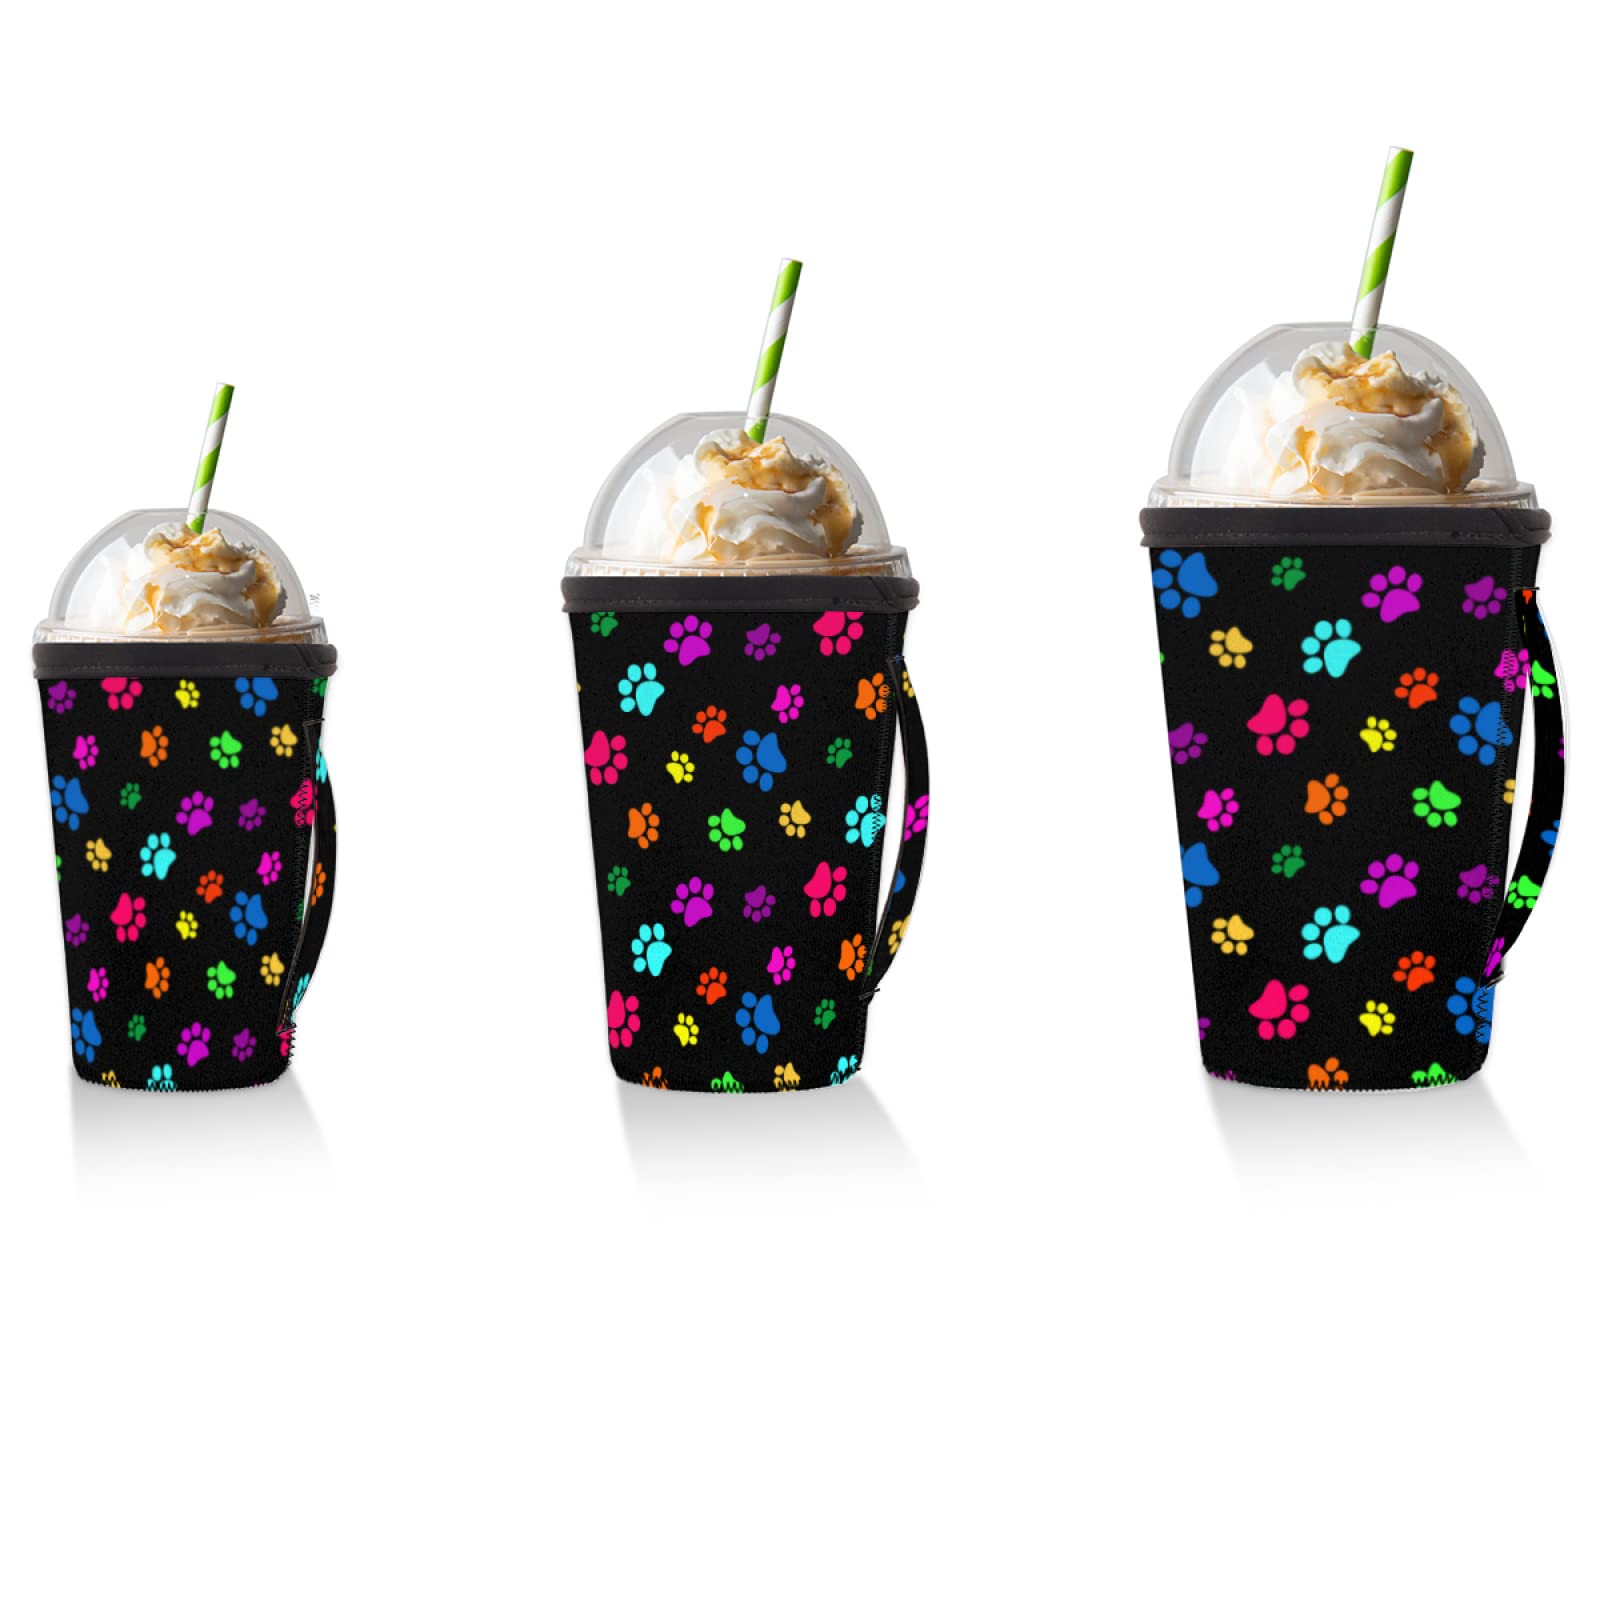 Colorful Animal Paw Print Iced Coffee Sleeve Reusable Insulator Cup Sleeve with Handle Neoprene Drink Sleeve Holder for Hot Cold Beverages 24-28oz